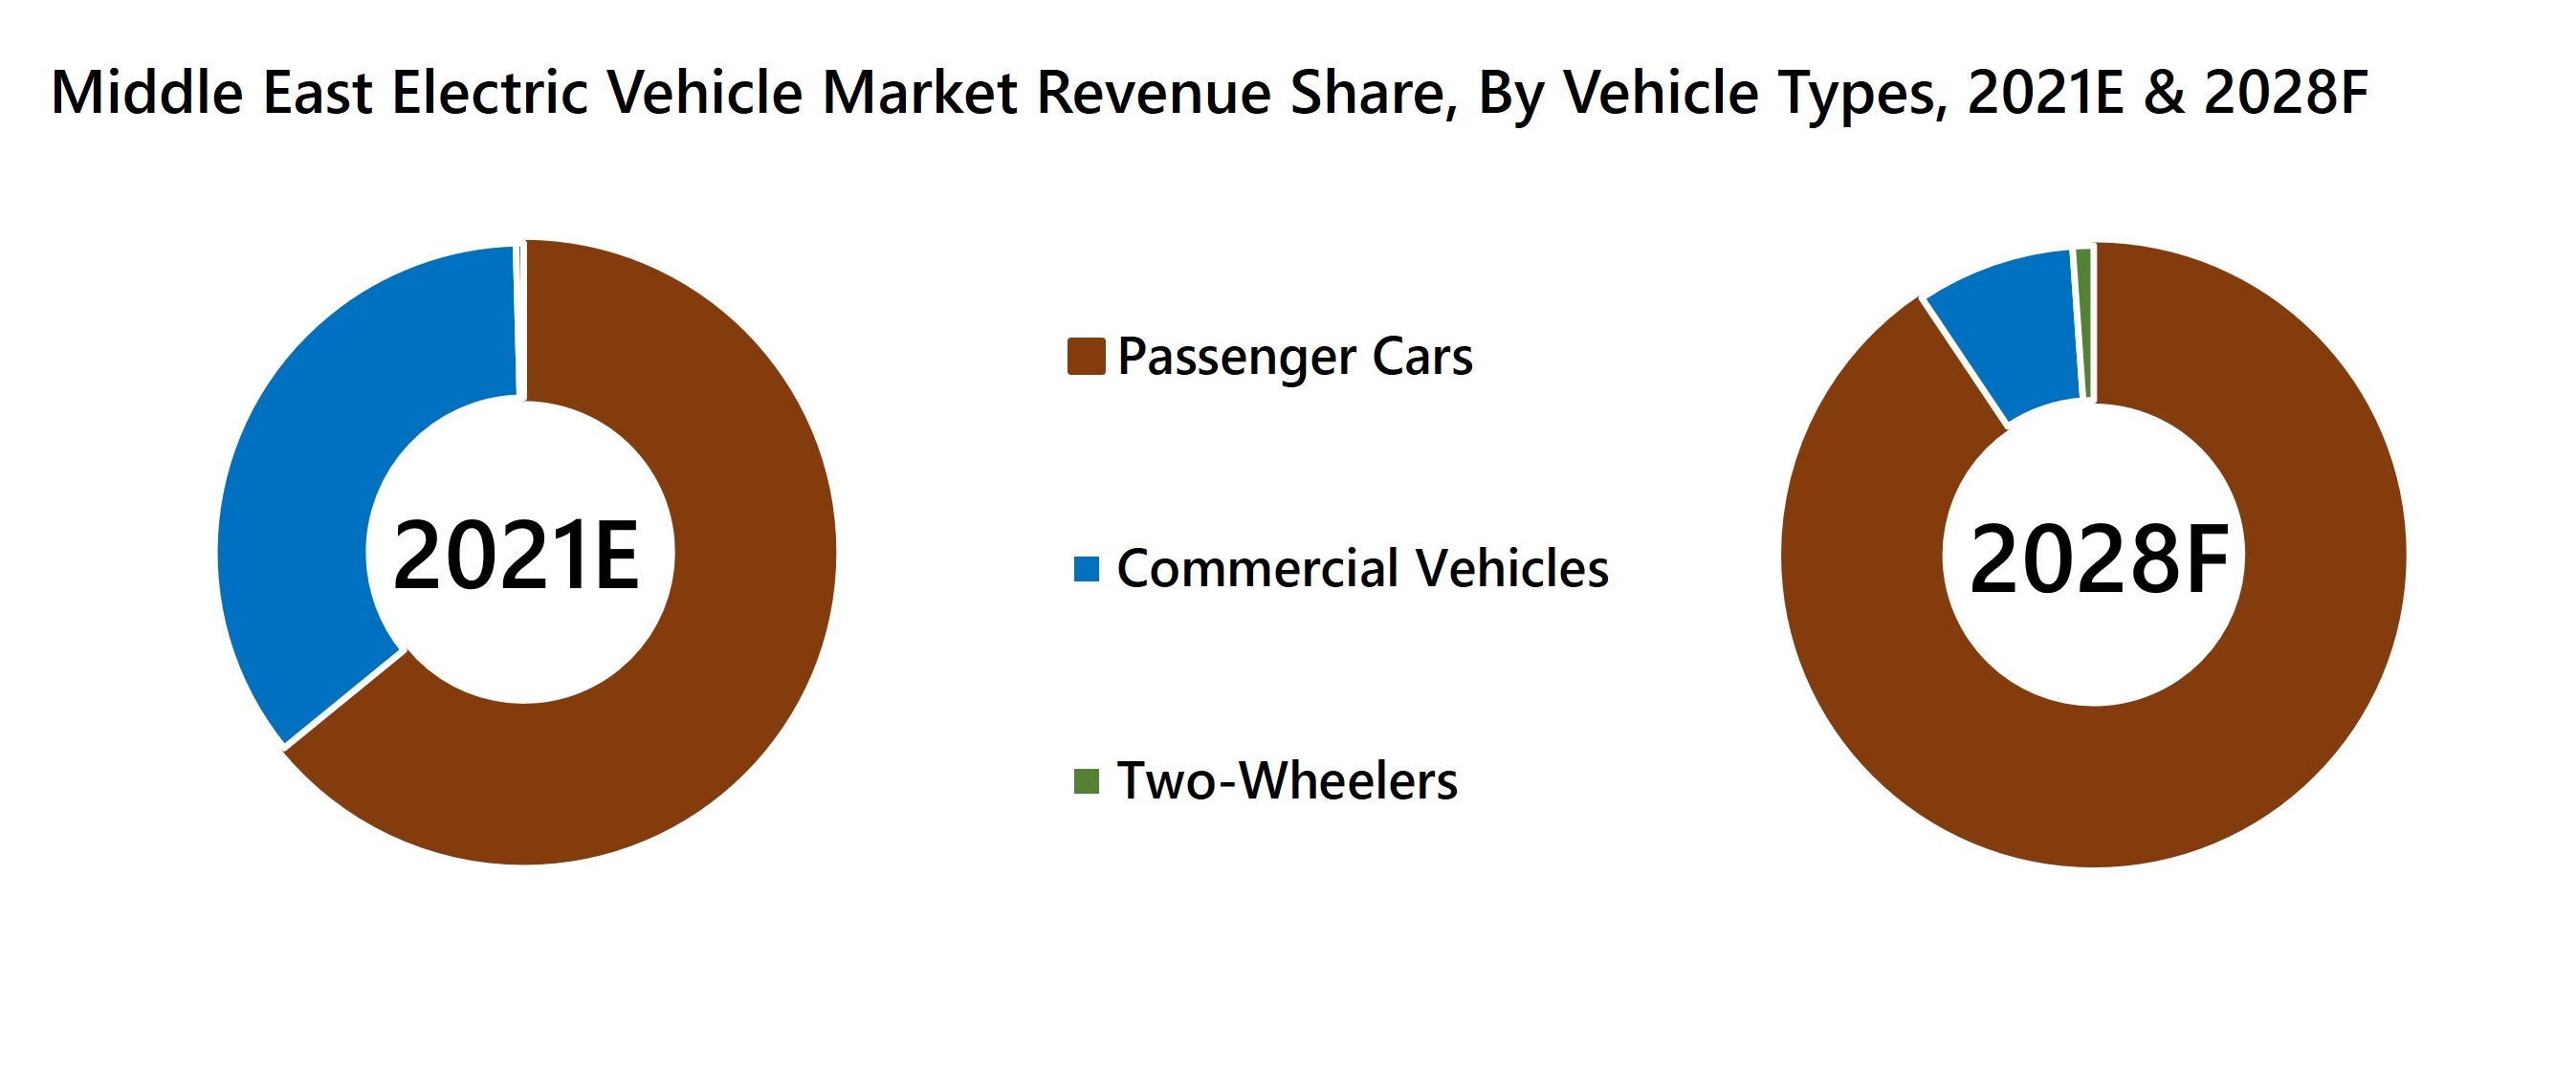 Middle East Electric Vehicle Market Revenue Share